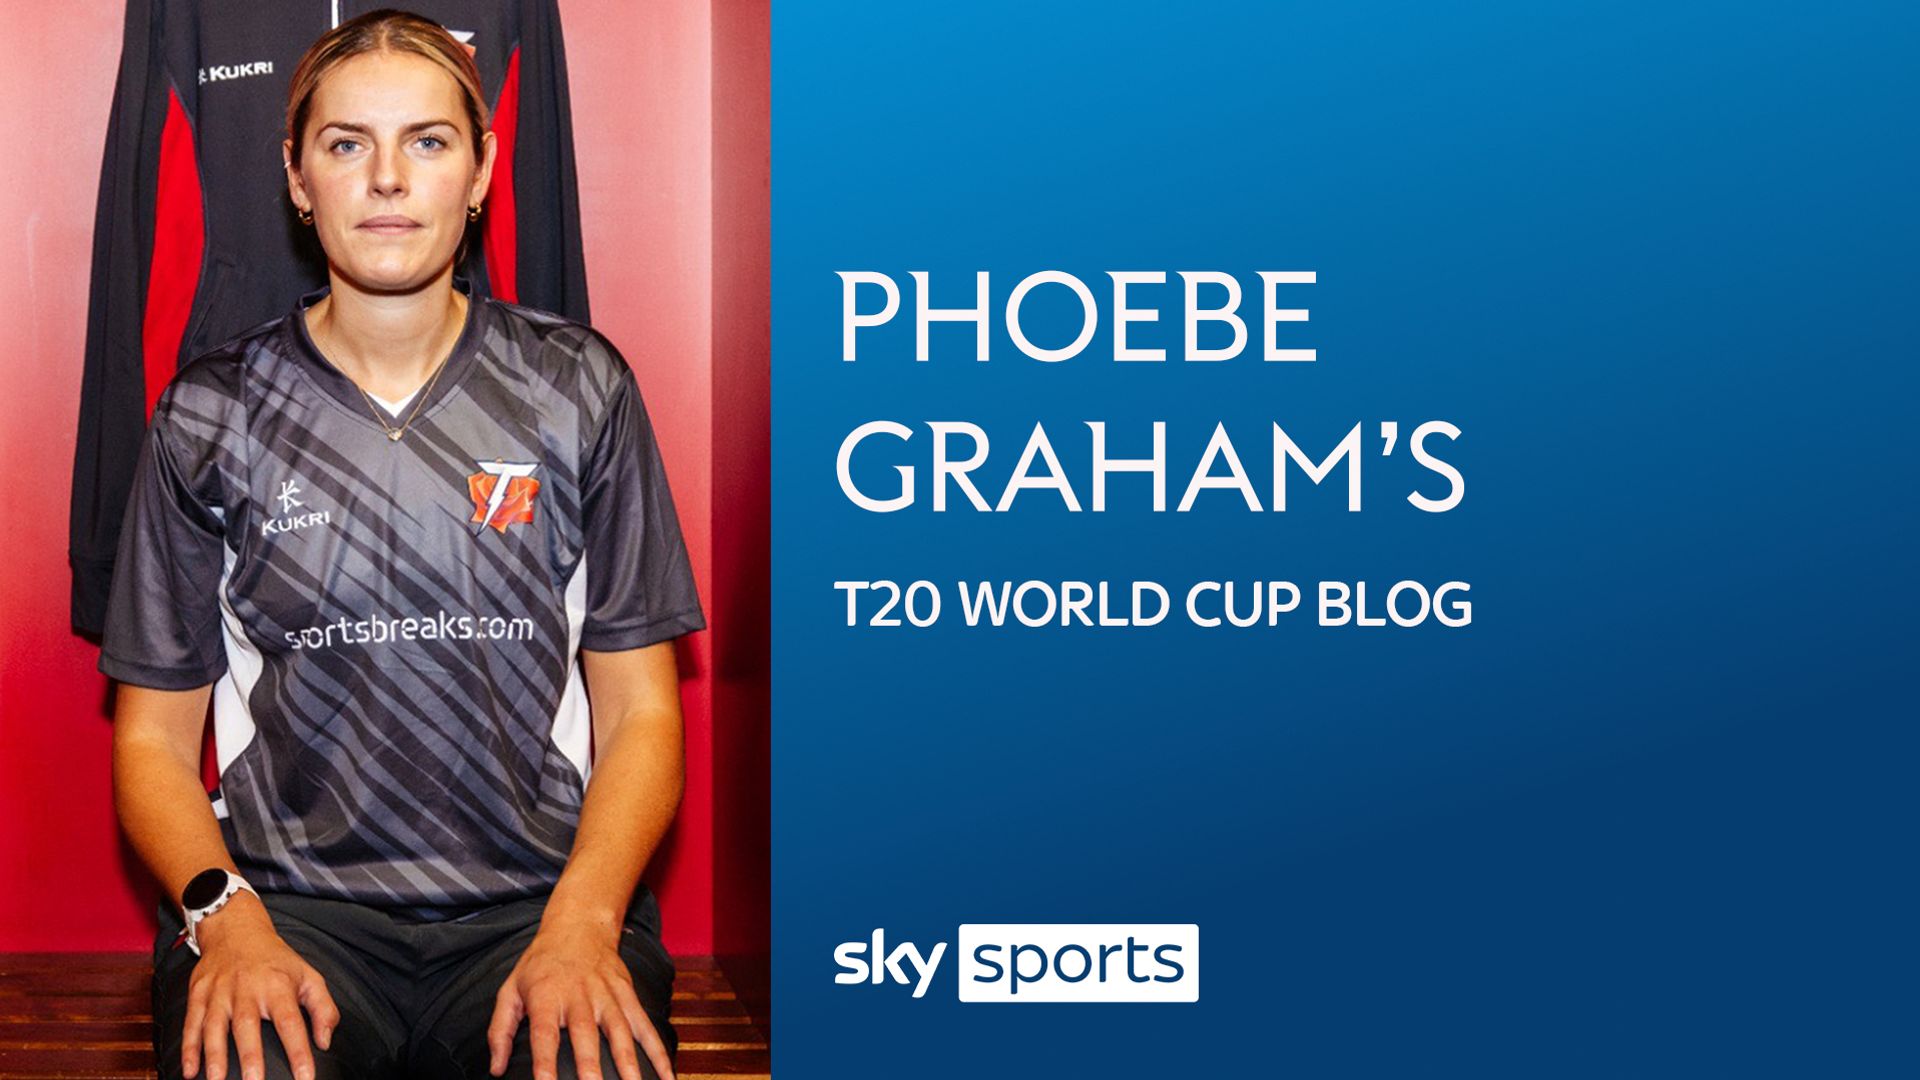 Phoebe Graham blog: England chances at T20 World Cup bolstered by youth